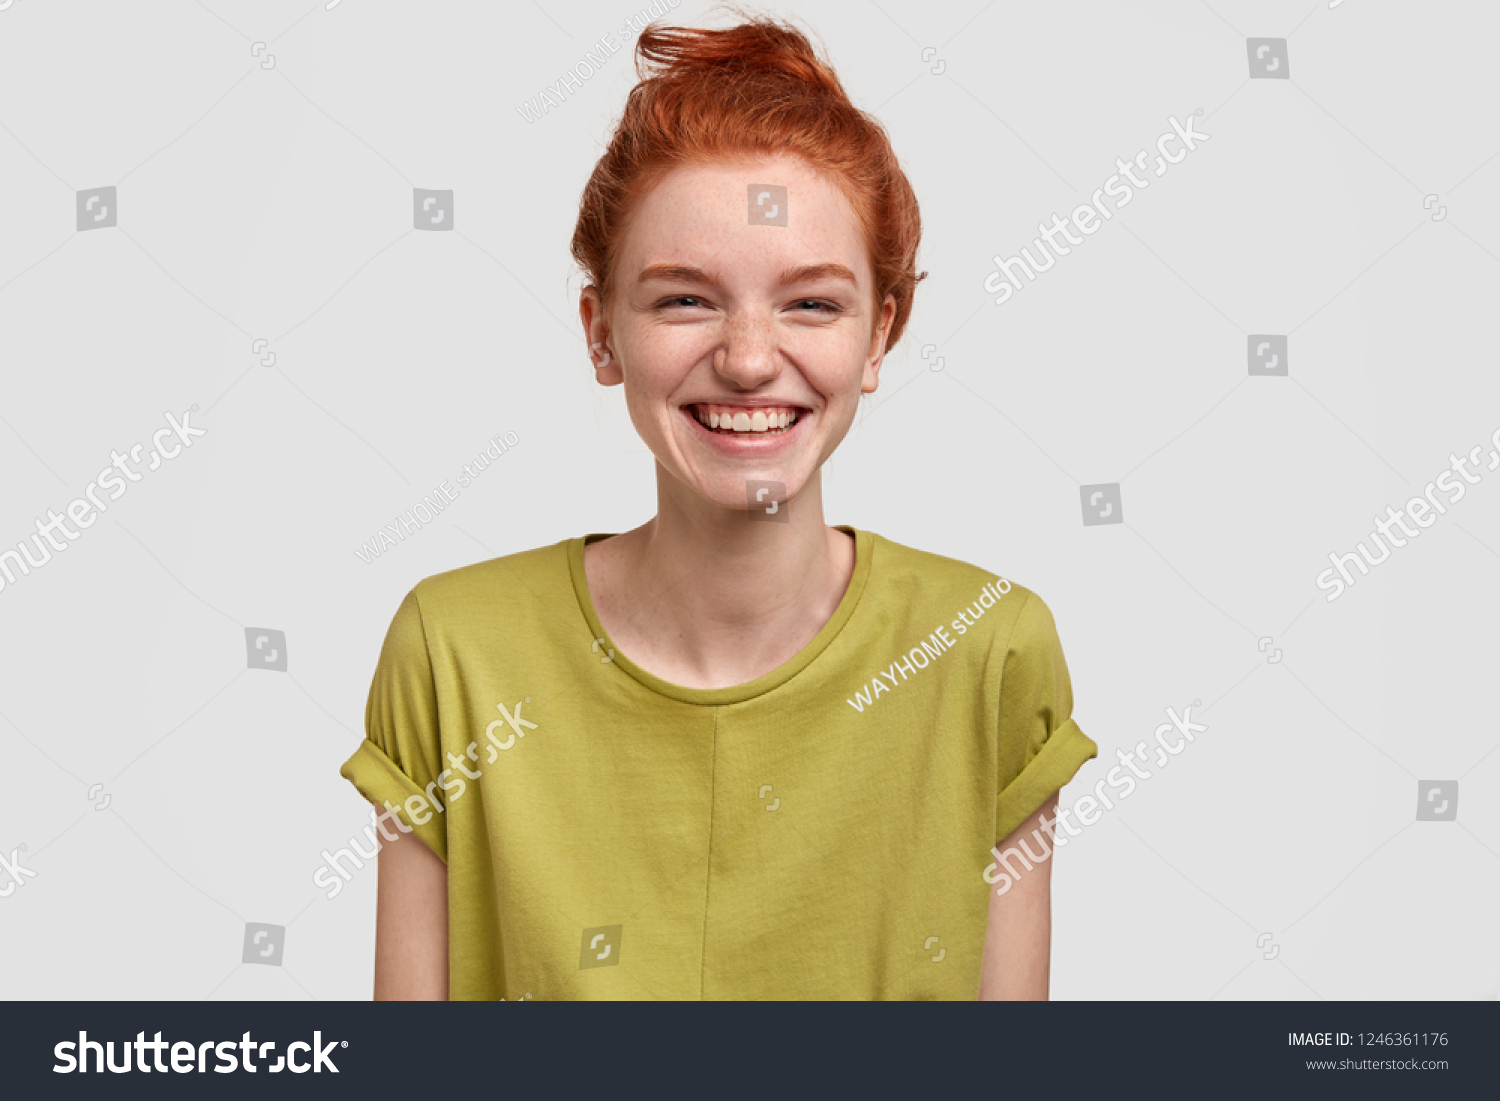 Lovely red haired girl with positive expression, laughs as watches funny TV show, enjoys weekend, dressed in green t shirt, has freckled skin, isolated over white background, amused by comic idea #1246361176